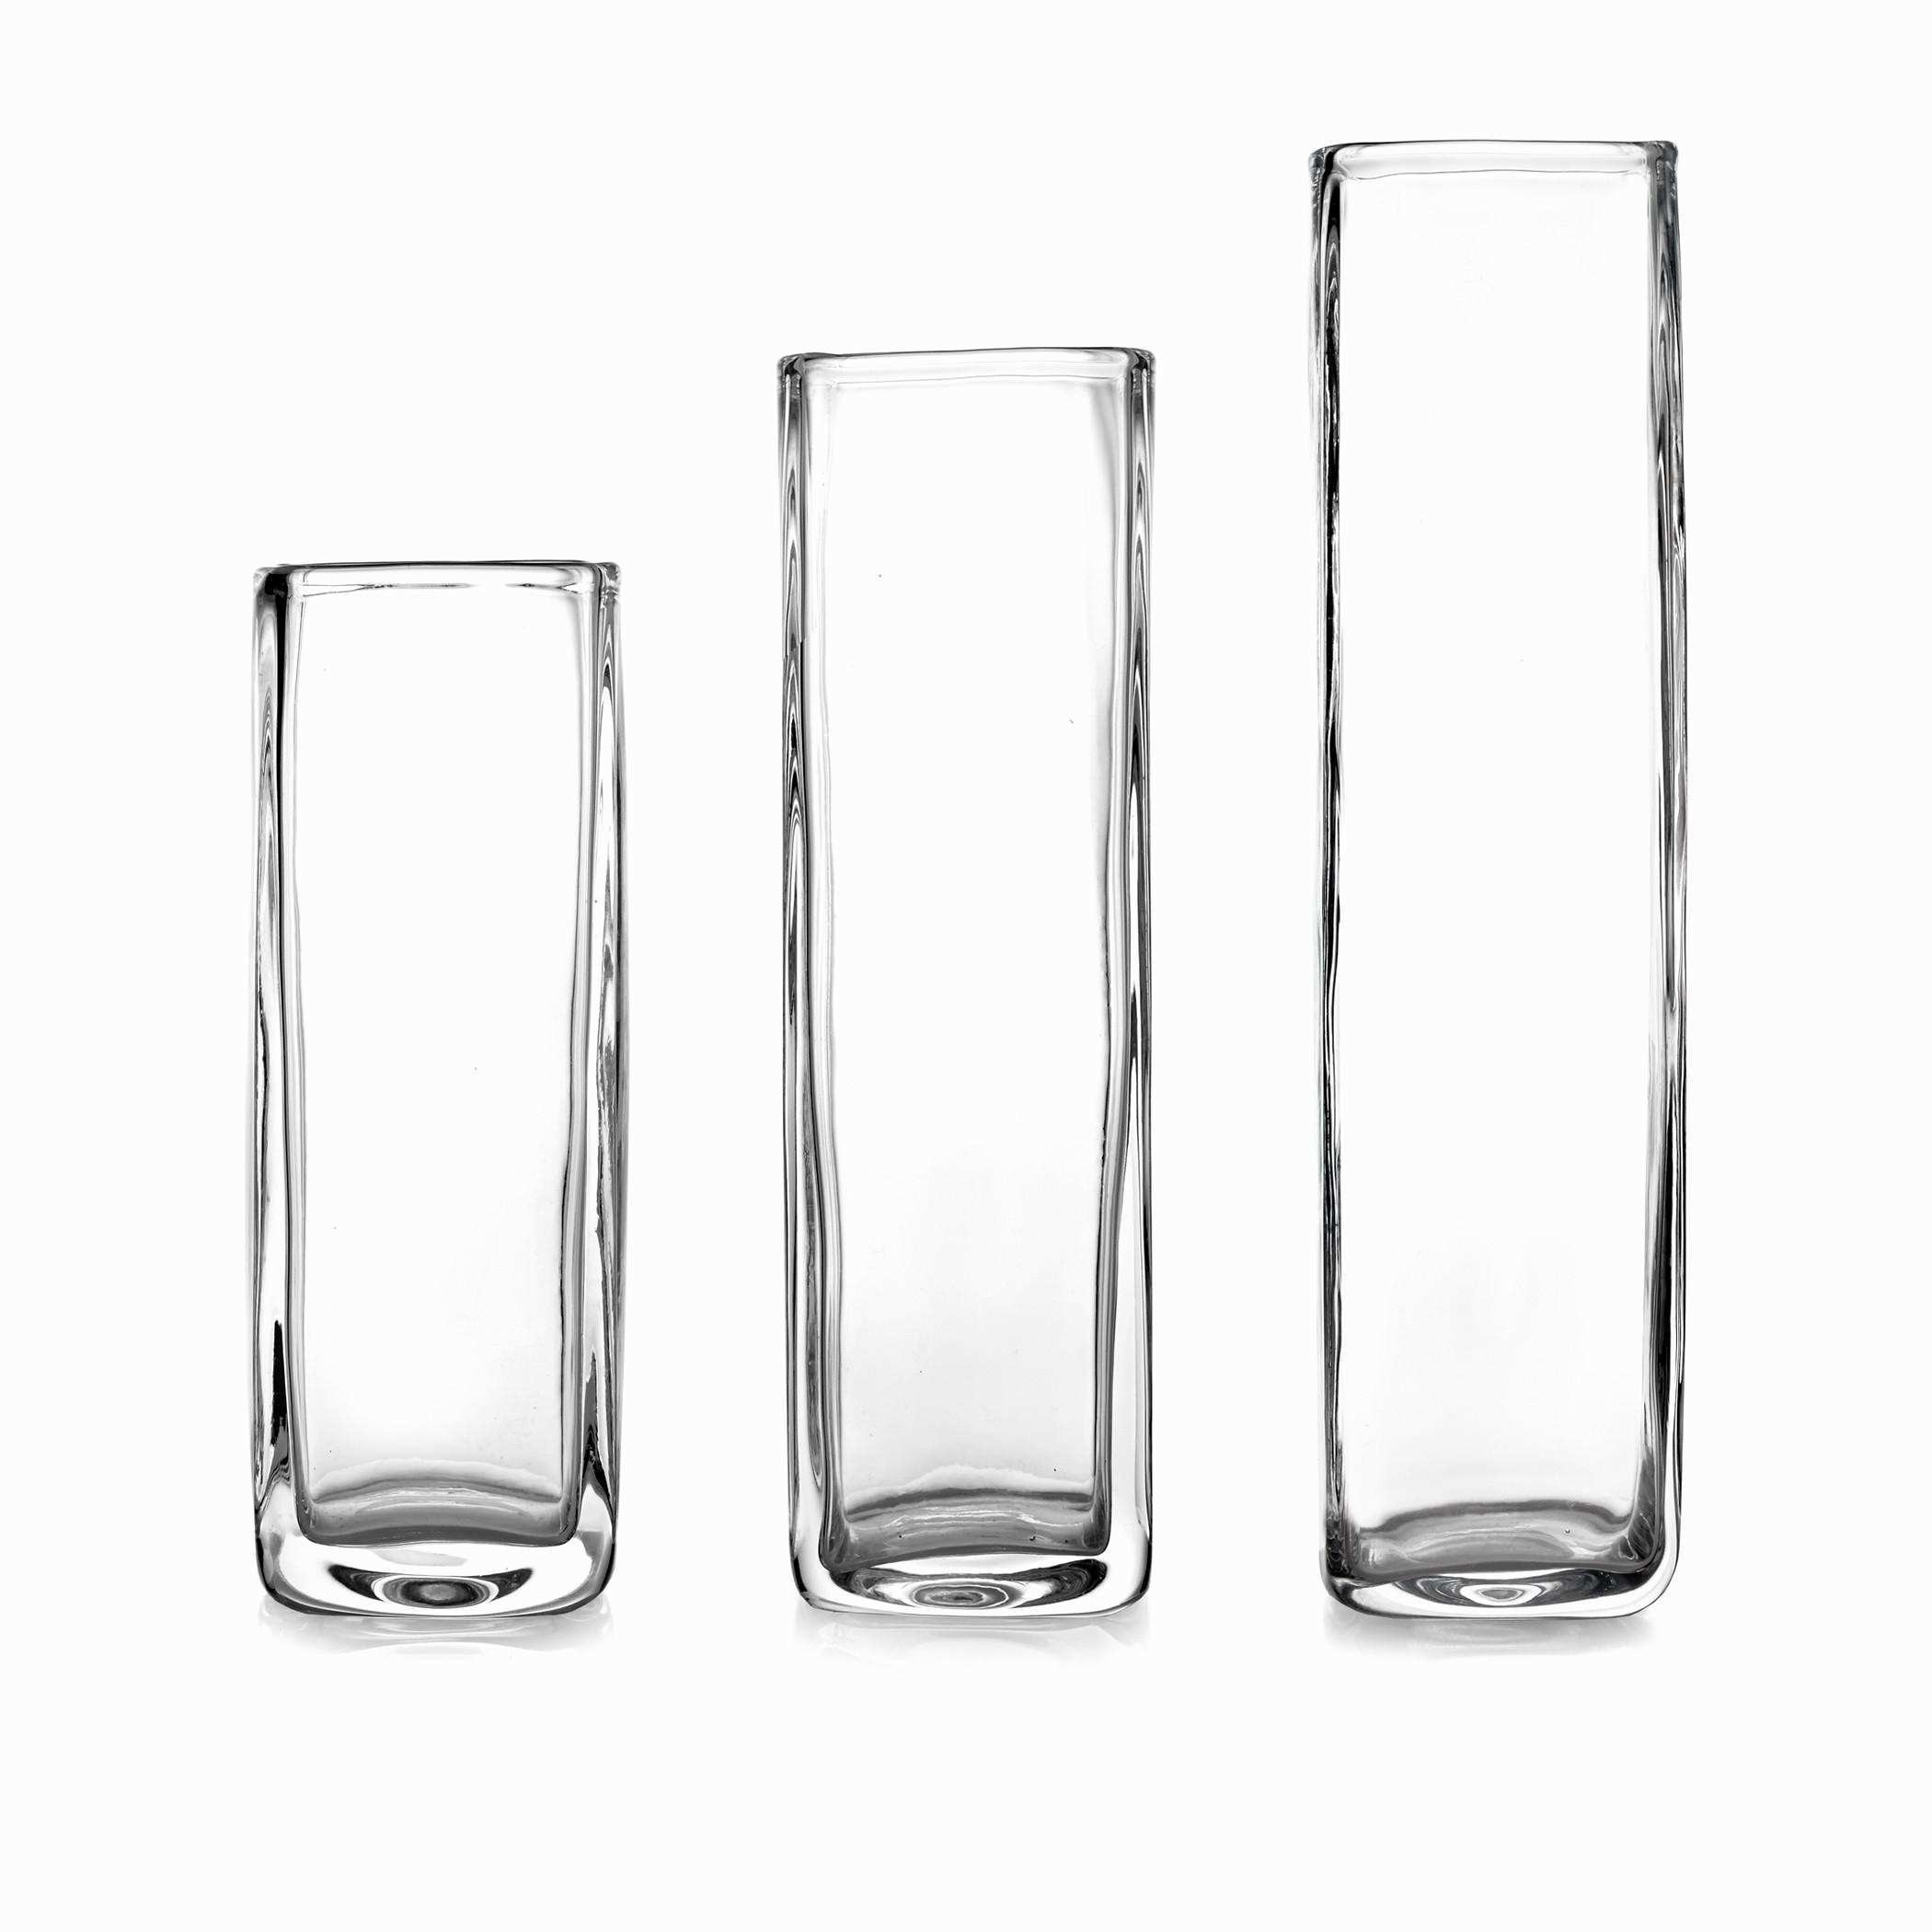 24 Perfect 12 Glass Cylinder Vase 2024 free download 12 glass cylinder vase of glass cylinder centerpieces photograph tall vase centerpiece ideas for glass cylinder centerpieces gallery glass wedding centerpieces inspirational living room tall